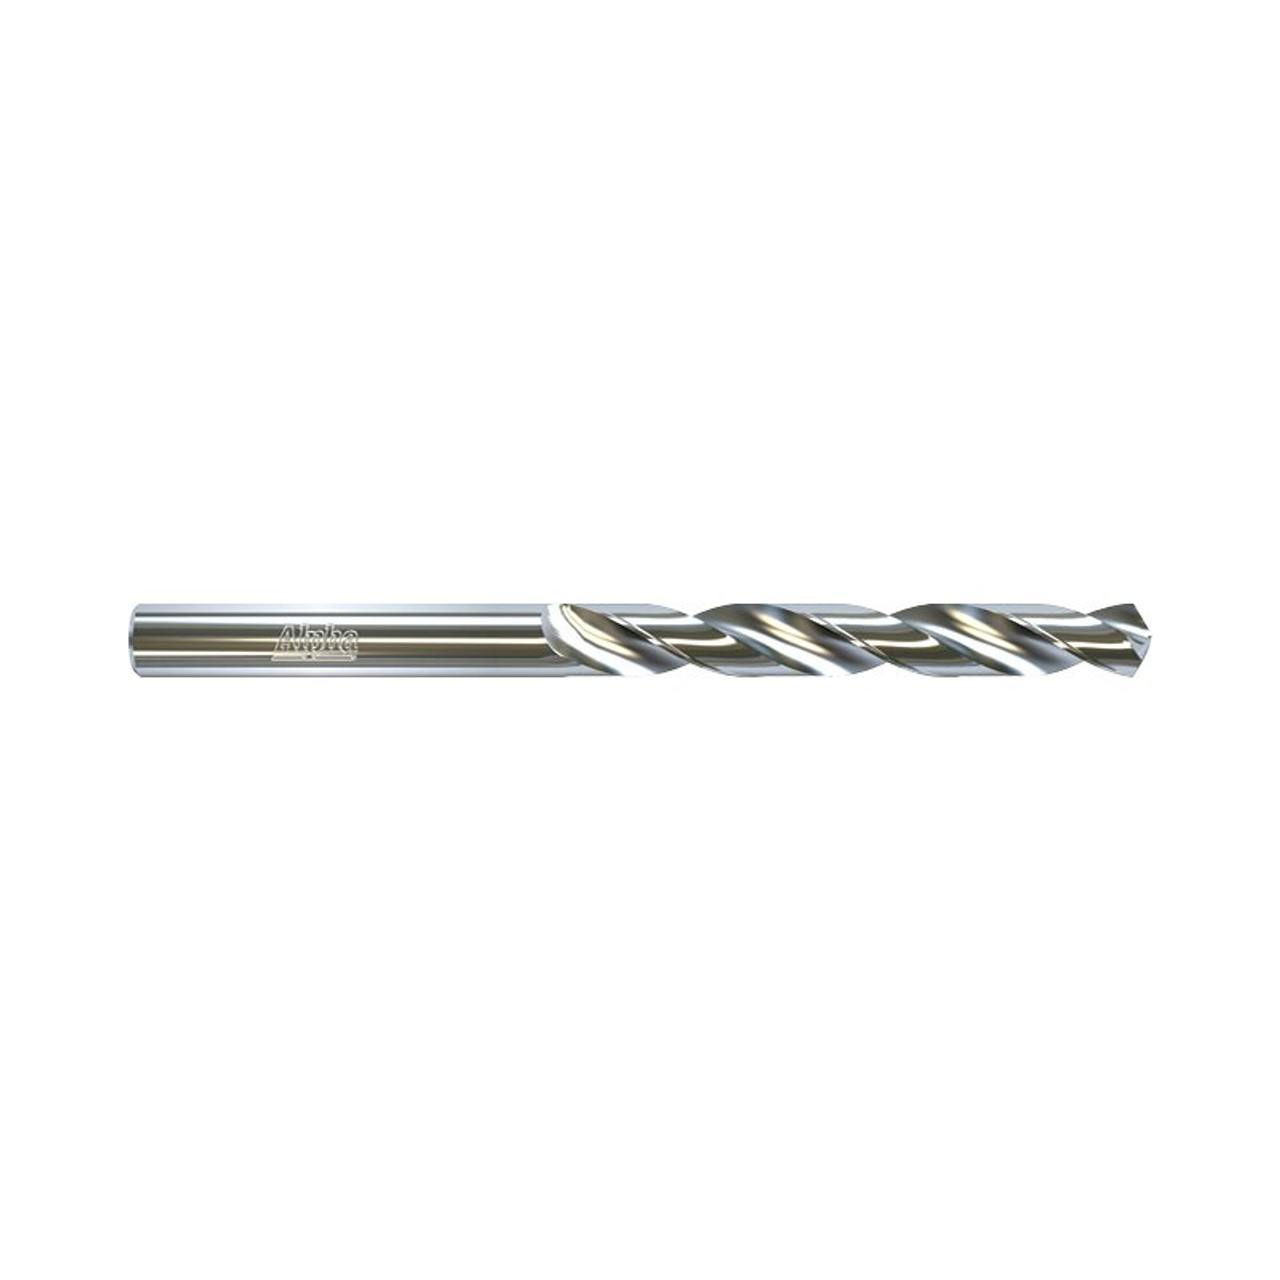 8.5Mm Jobber Drill Bit Carded - Silver Series